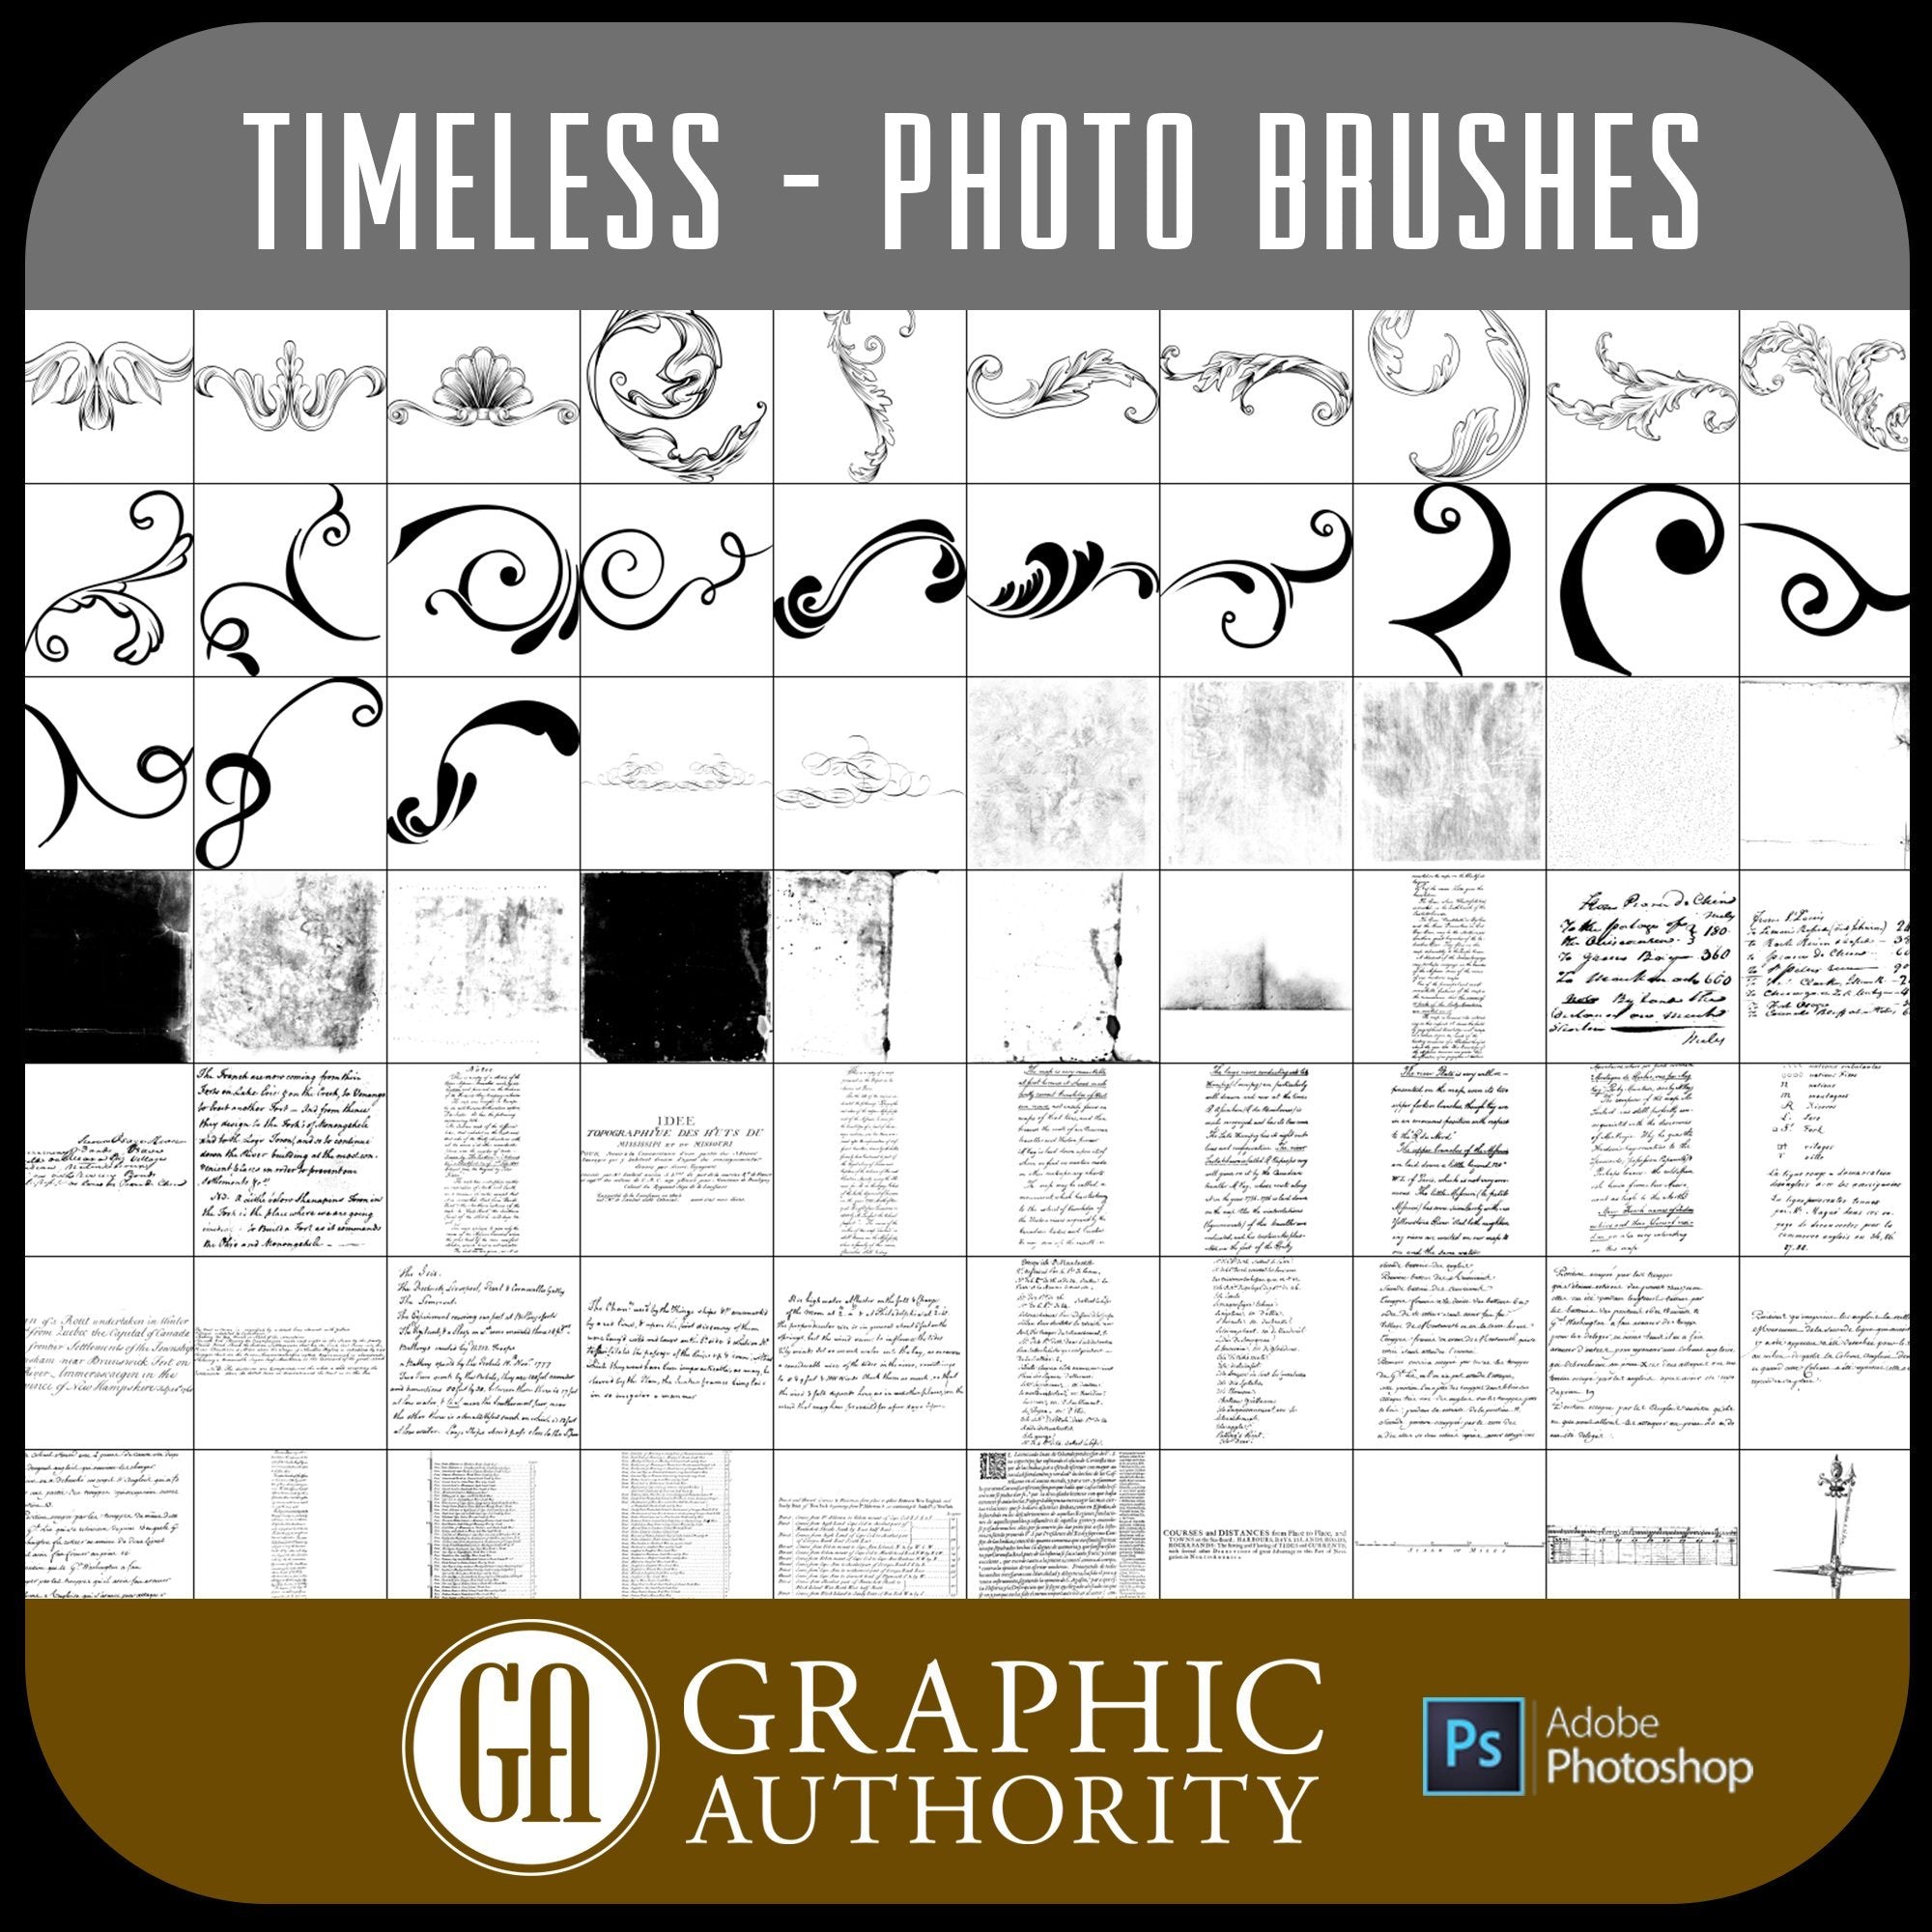 Timeless - Photo Graphics - Photoshop ABR Brushes-Photoshop Template - Graphic Authority